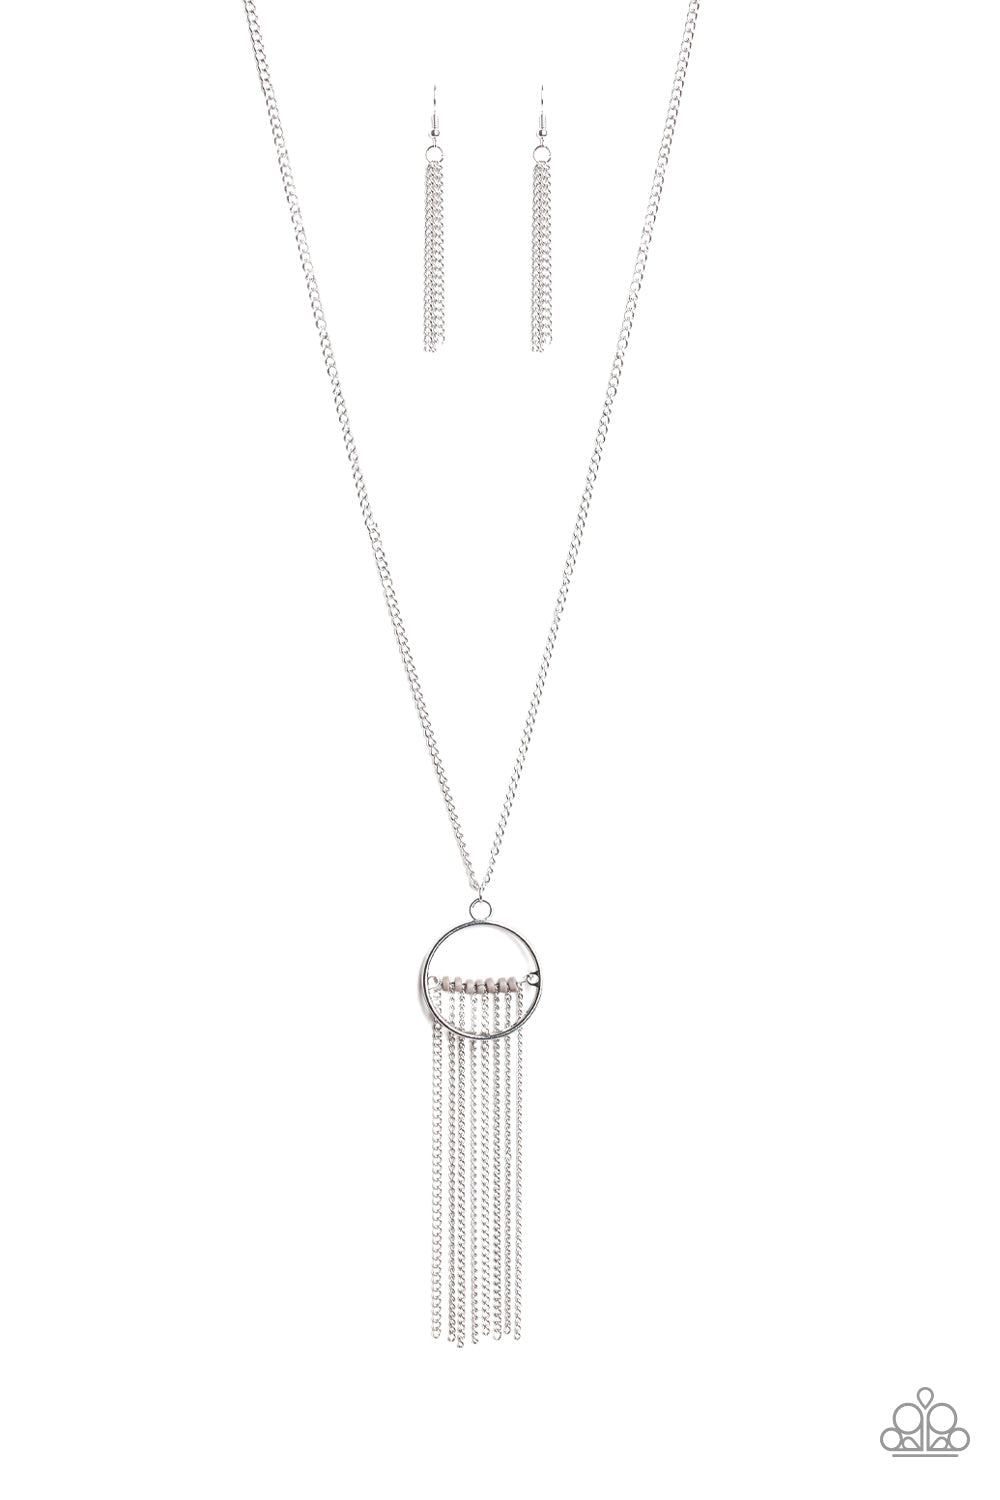 Terra Tassel - Silver Necklace - Paparazzi Accessories - Infused with a shimmery silver chain fringe, a row of gray beads is threaded along a silver rod that is fitted in place inside the center of an airy silver ring. The colorful pendant swings from the bottom of a lengthened silver chain for a trendy tribal look. Features an adjustable clasp closure. Sold as one individual necklace. 